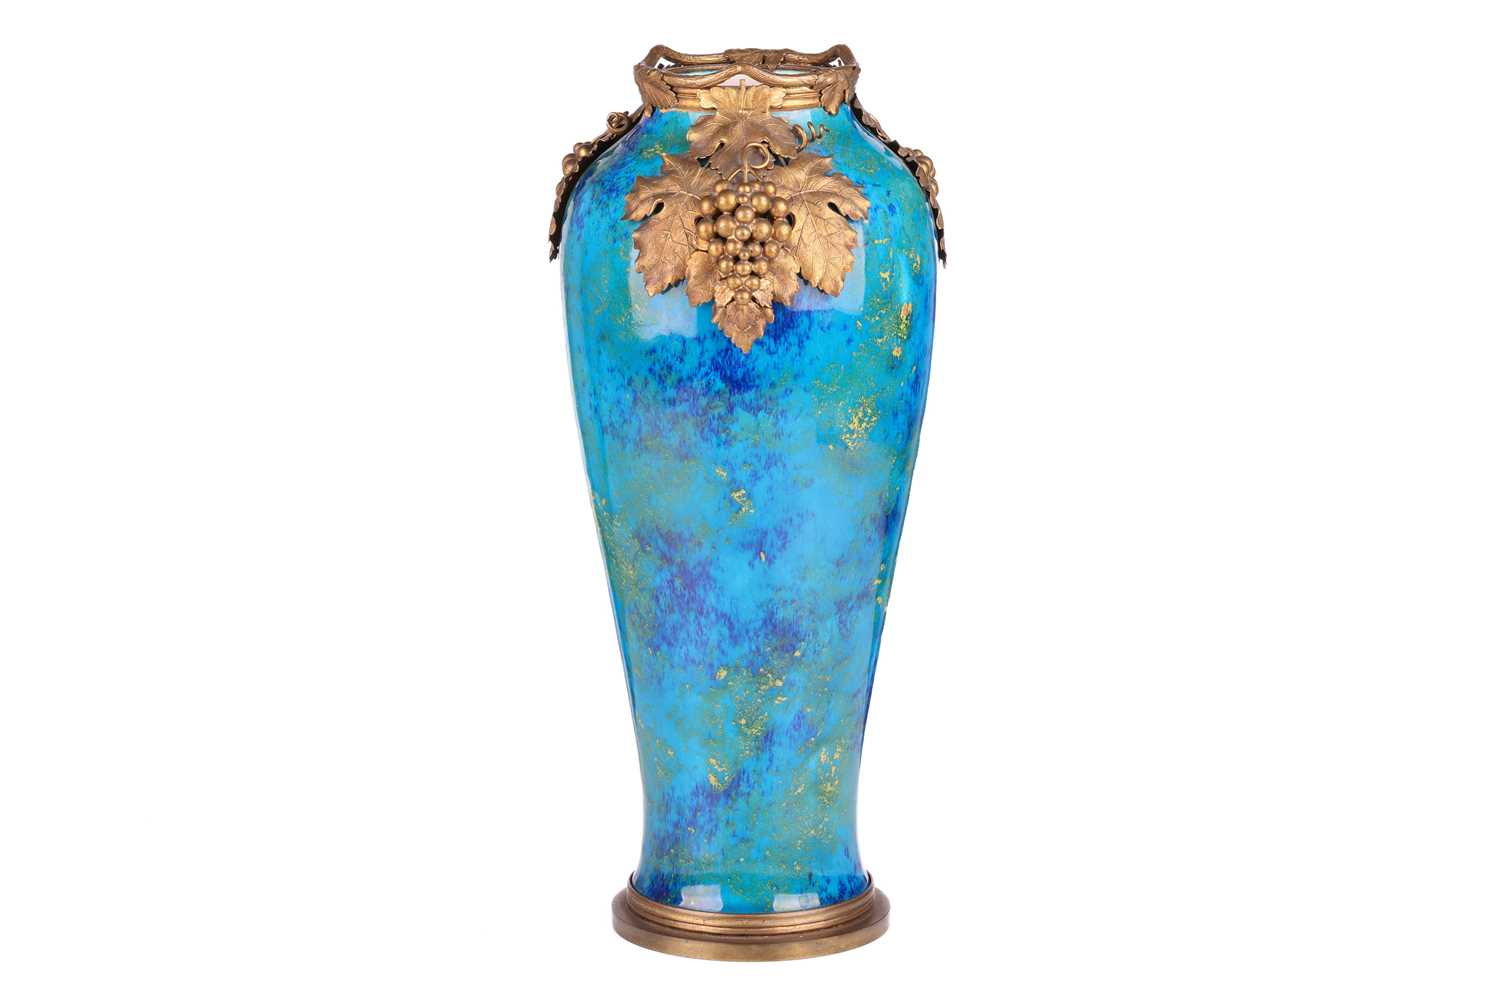 Paul Milet for Sevres, an early 20th-century tall ormolu mounted vase, with applied grape and fine - Image 2 of 5